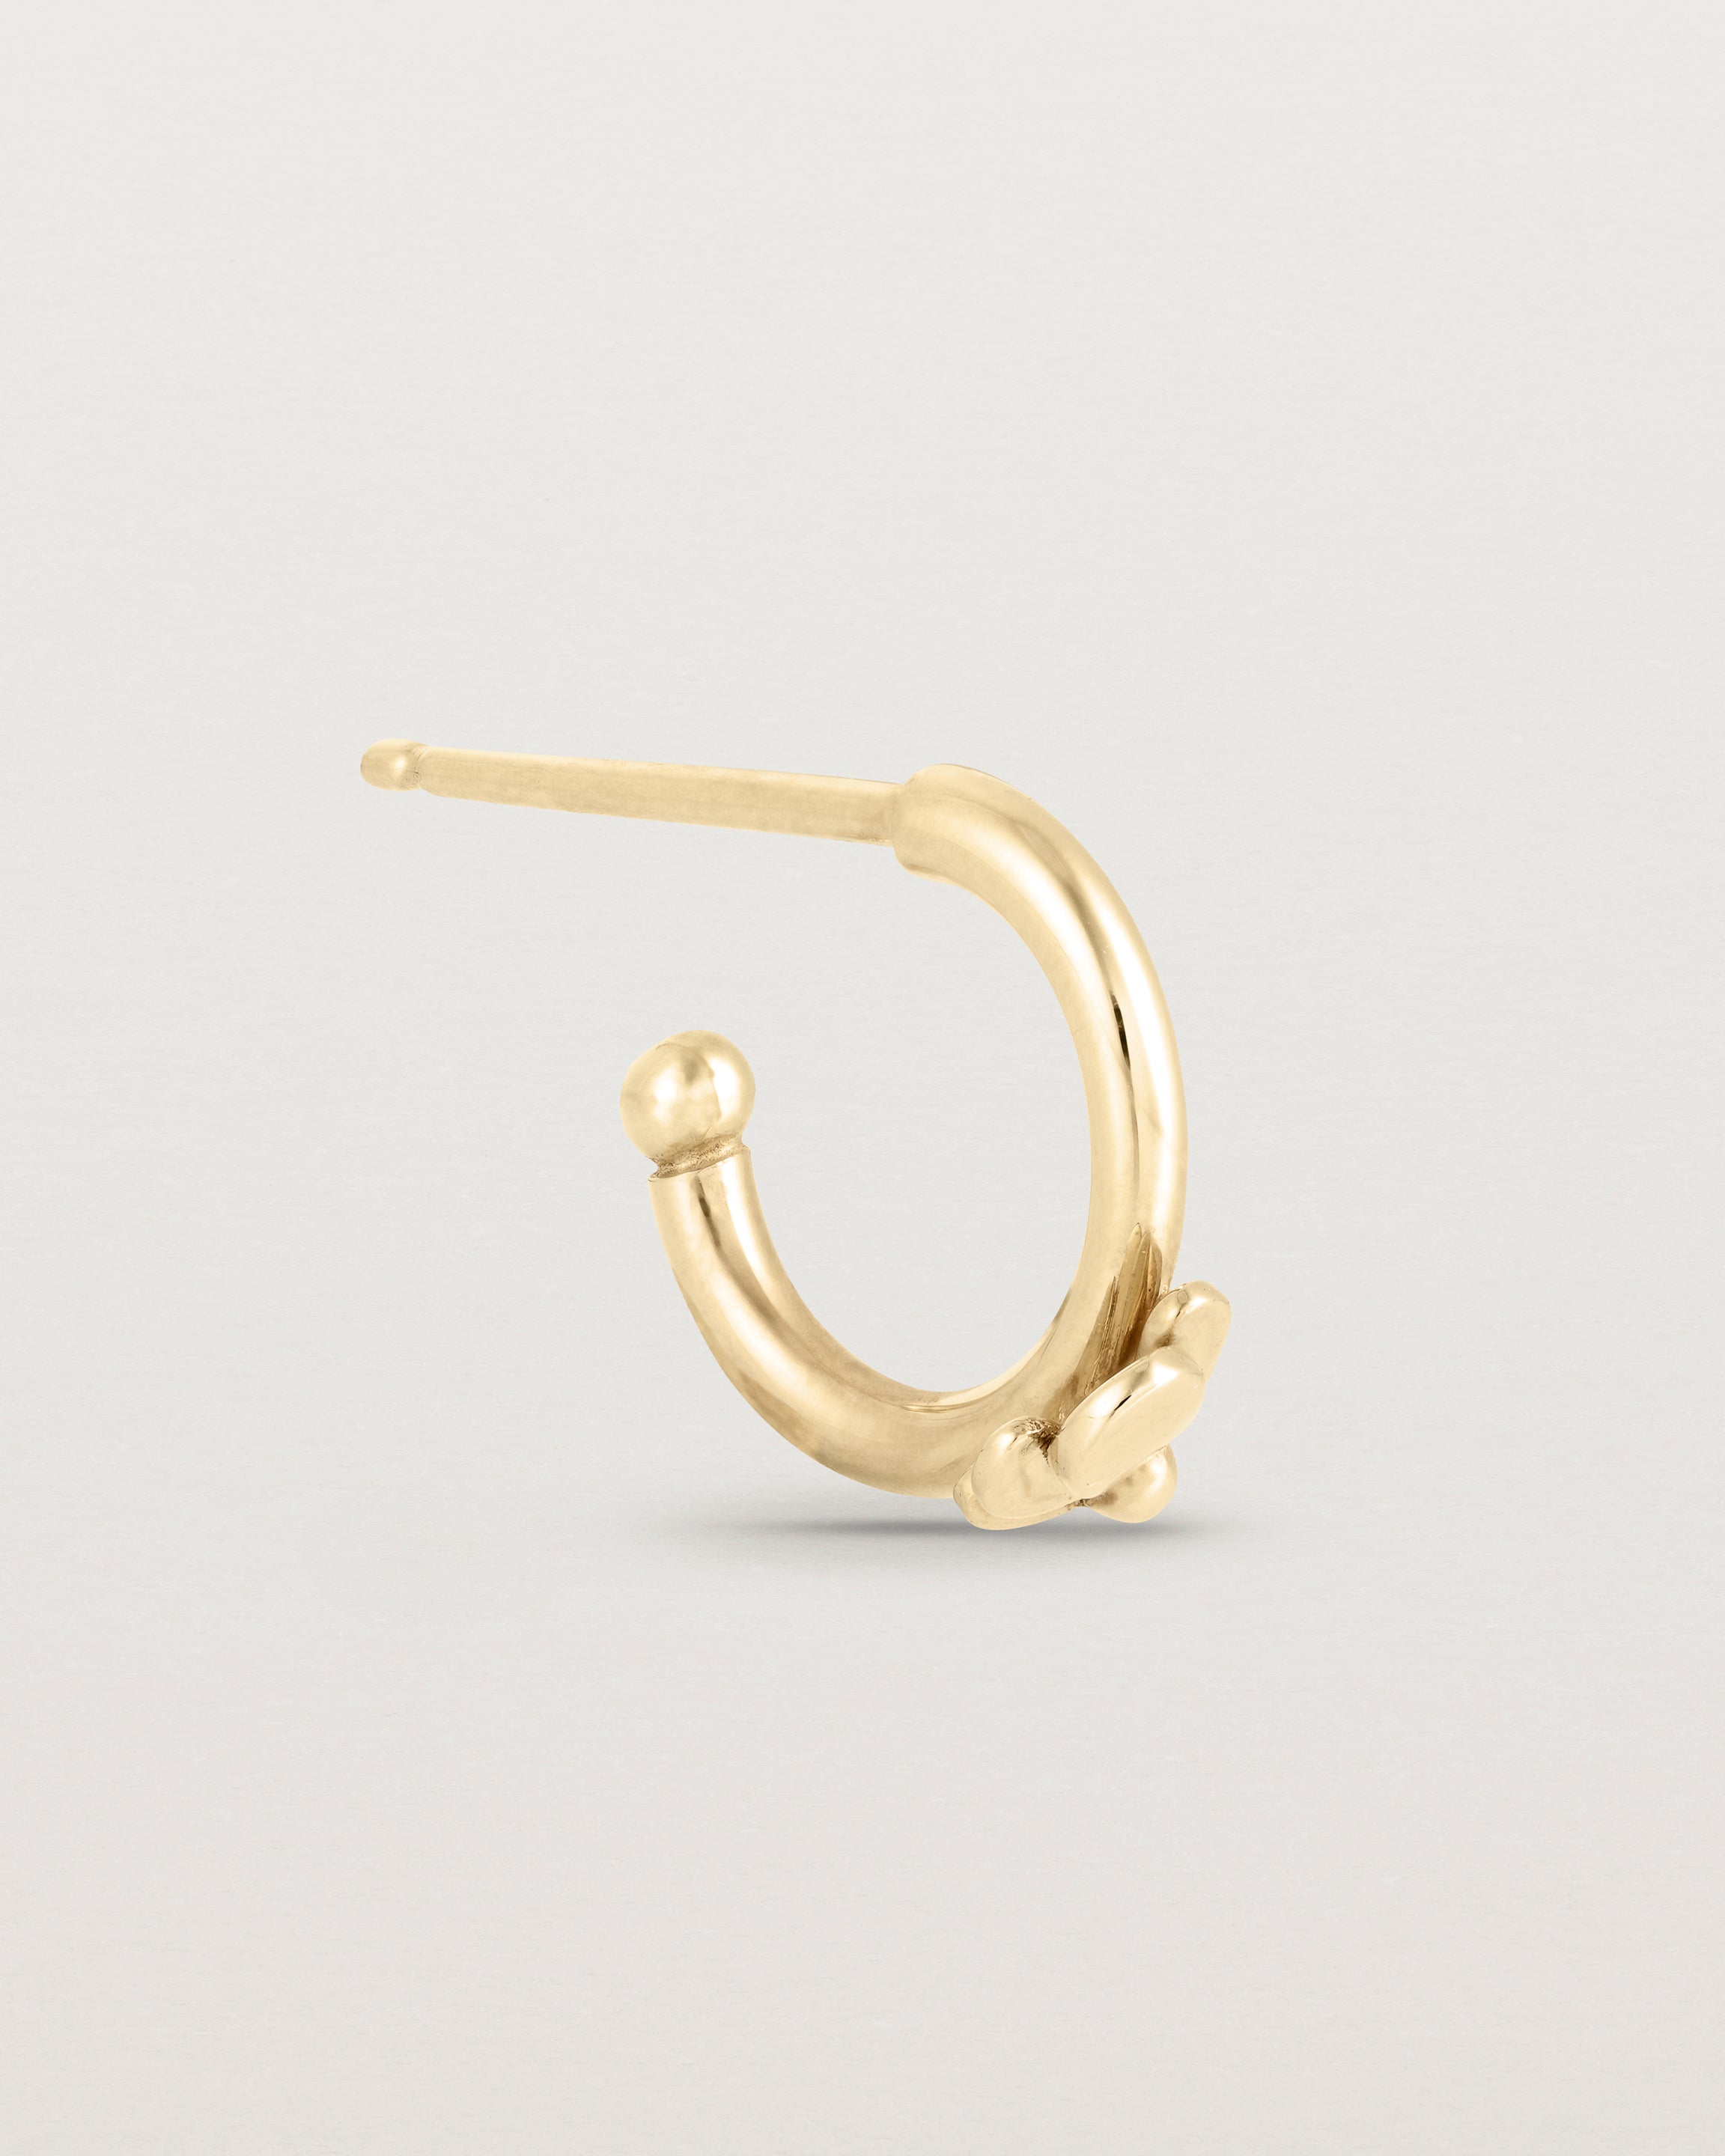 A single Aeris Hoop in yellow gold.